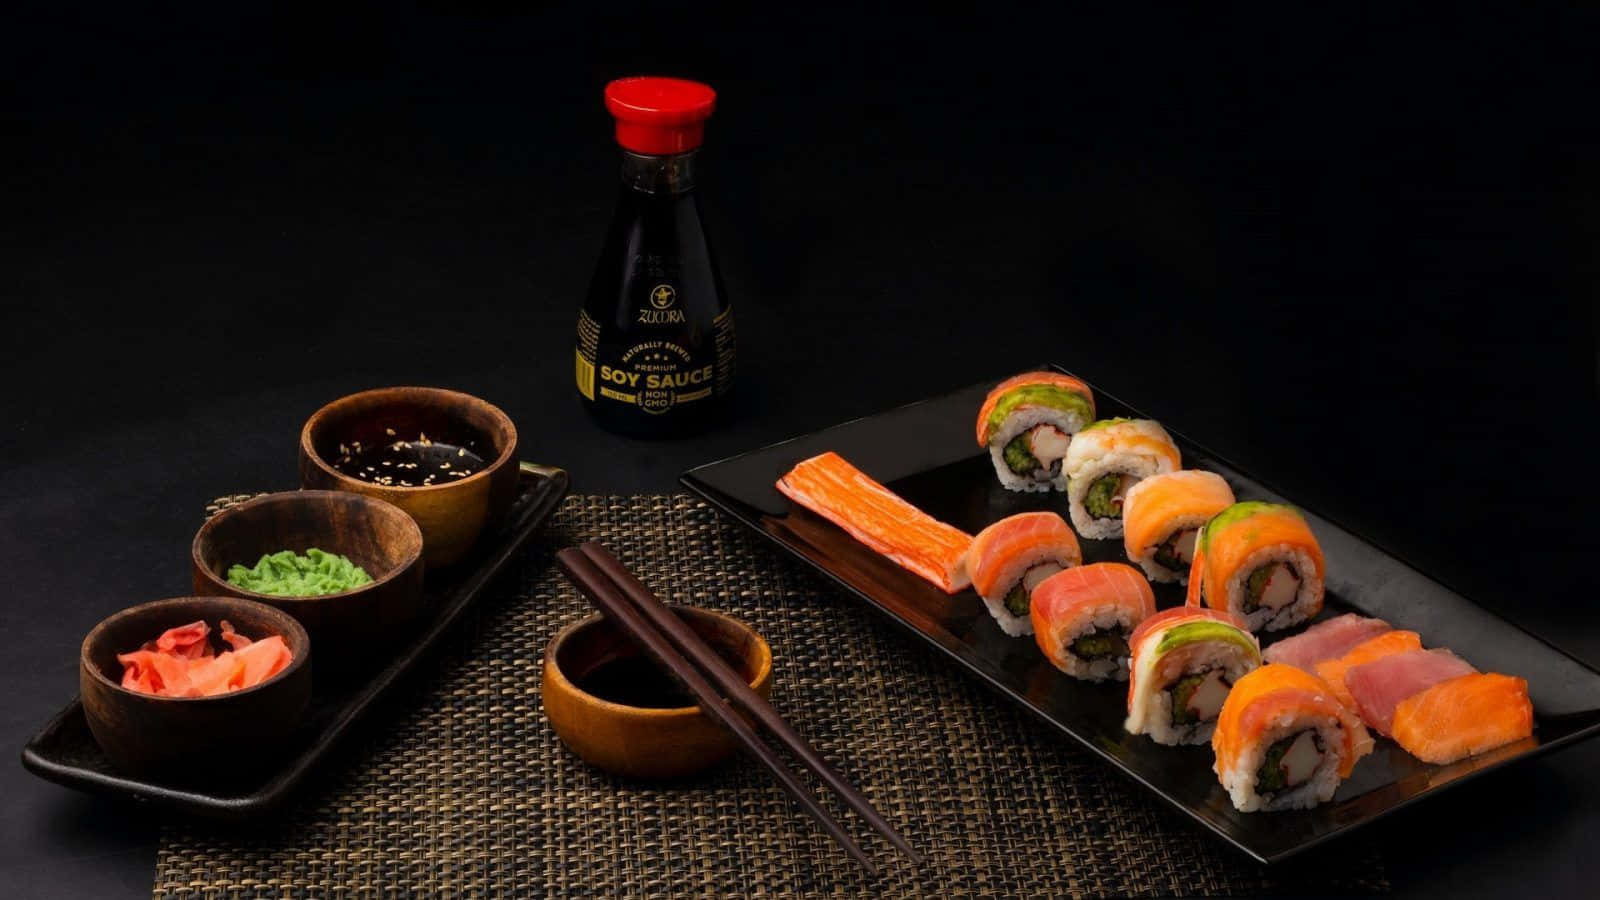 Delicious assortment of sushi rolls on a wooden serving platter